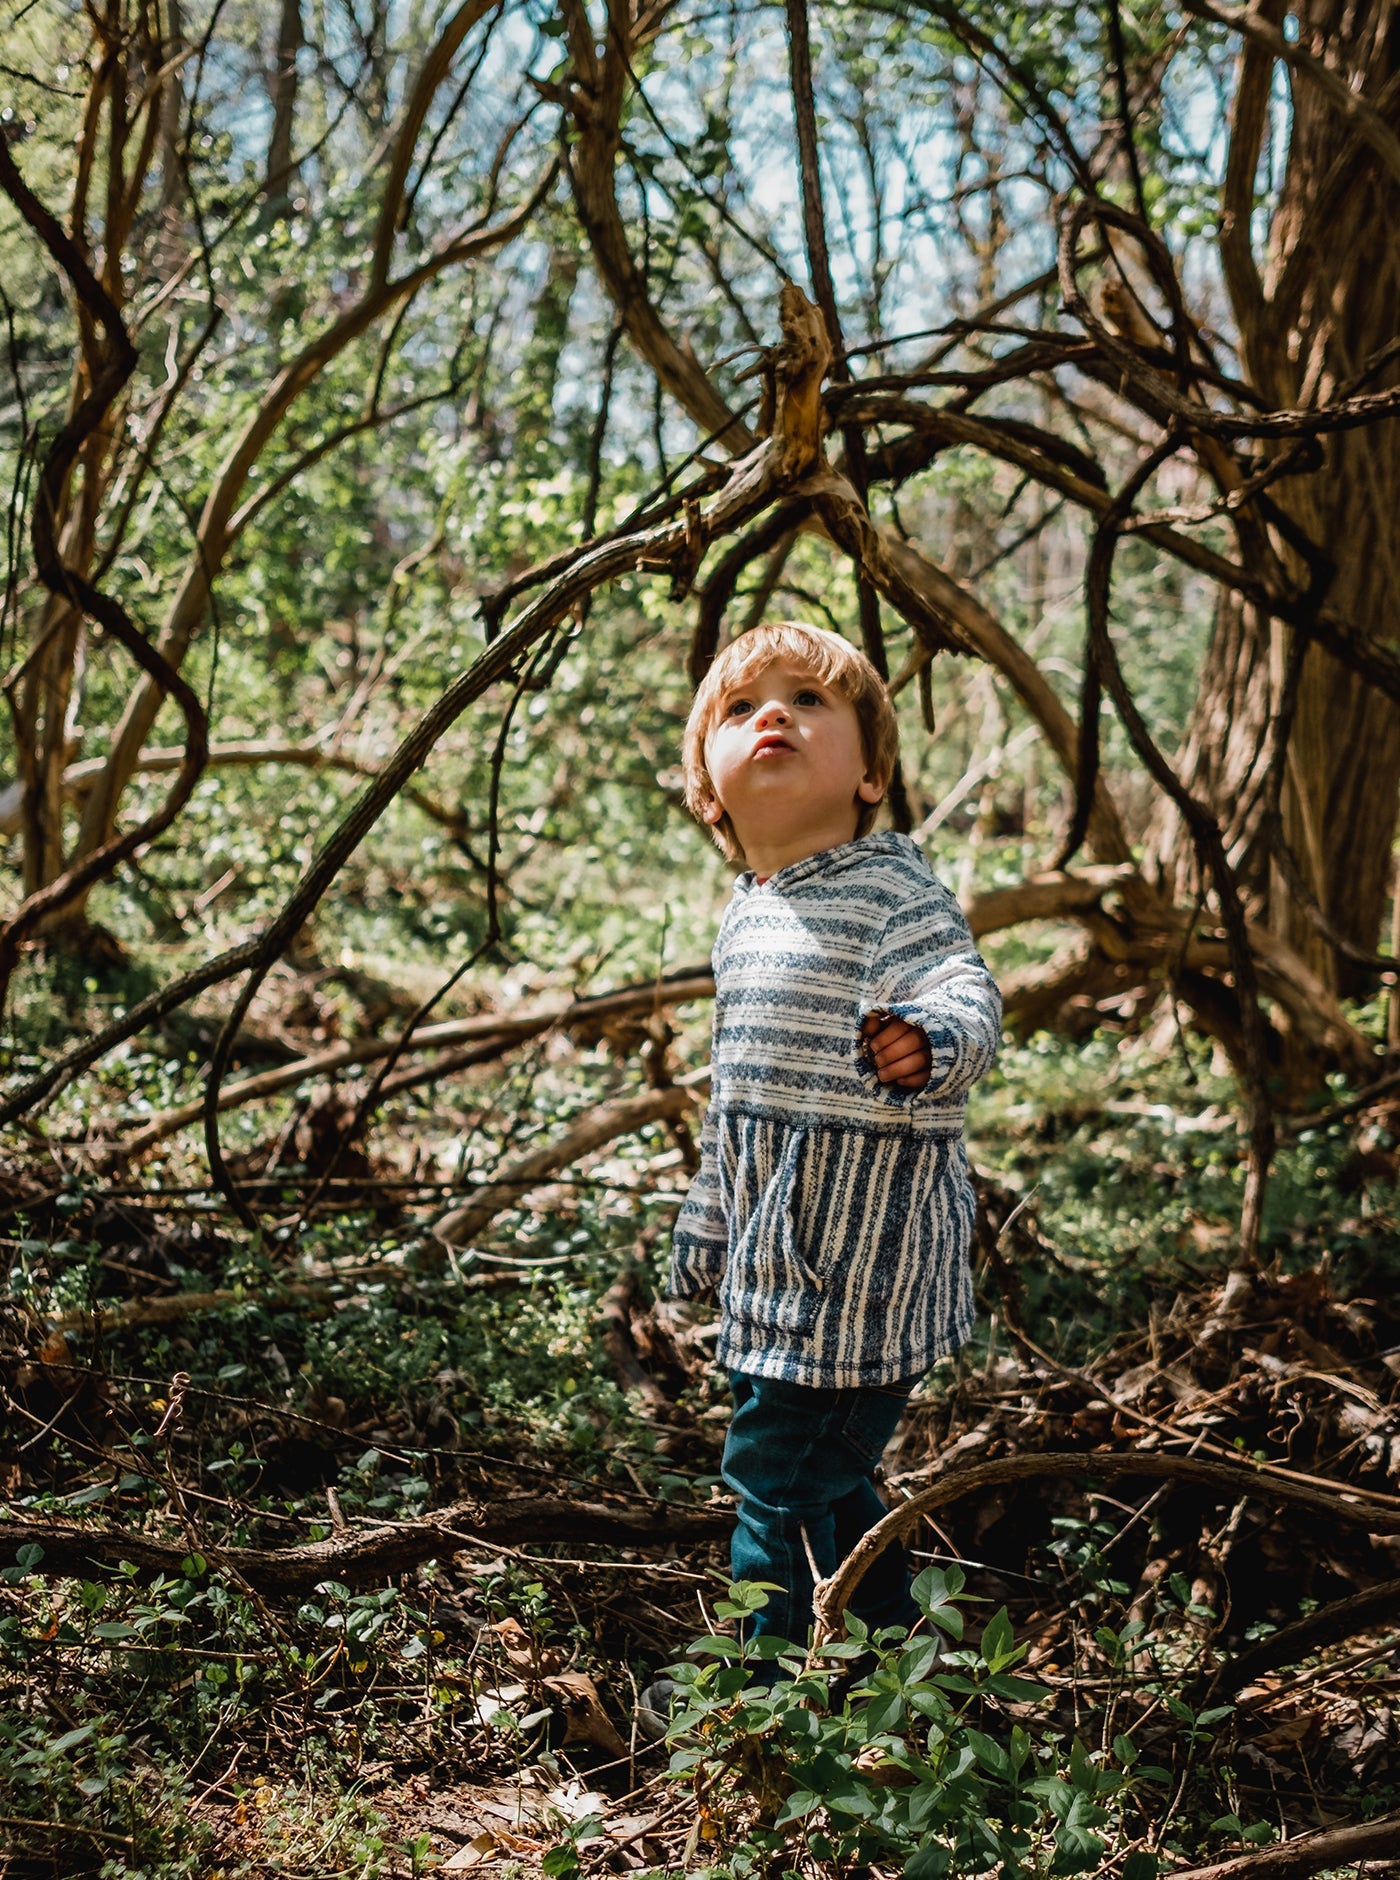 Toddler in woodland setting looking up at sky